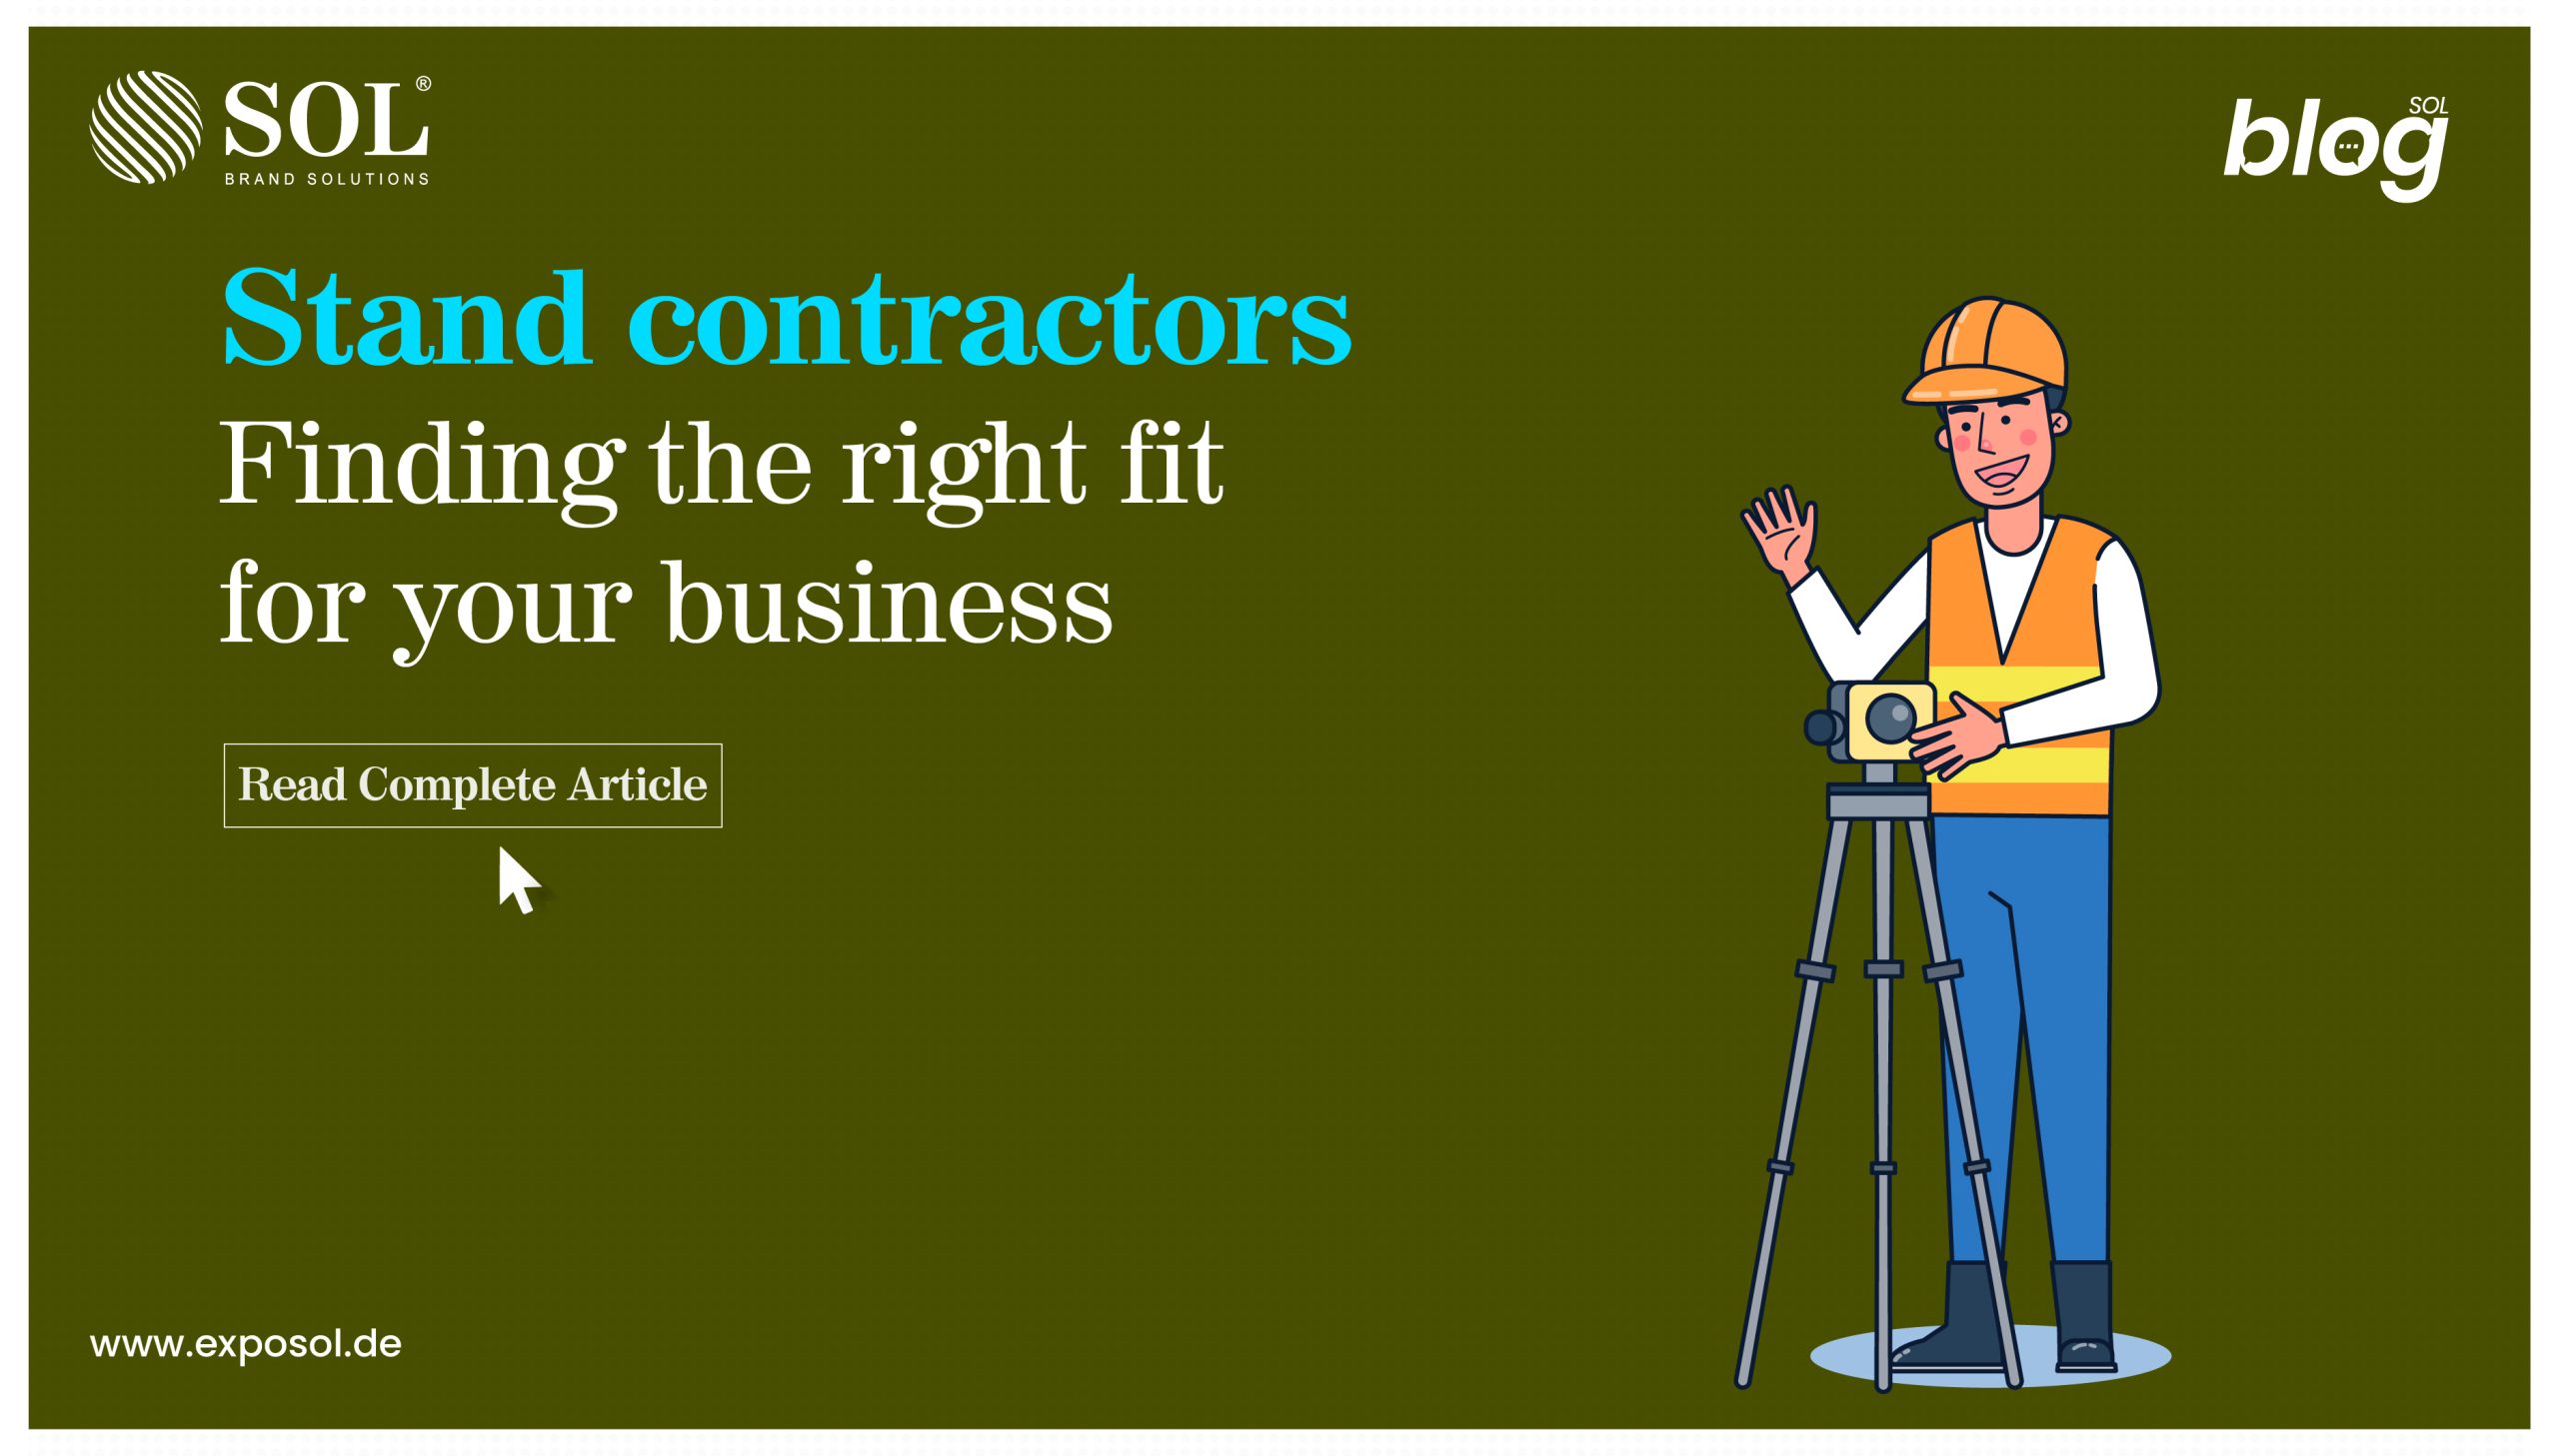 STAND CONTRACTORS: FINDING THE RIGHT FIT FOR YOUR BUSINESS